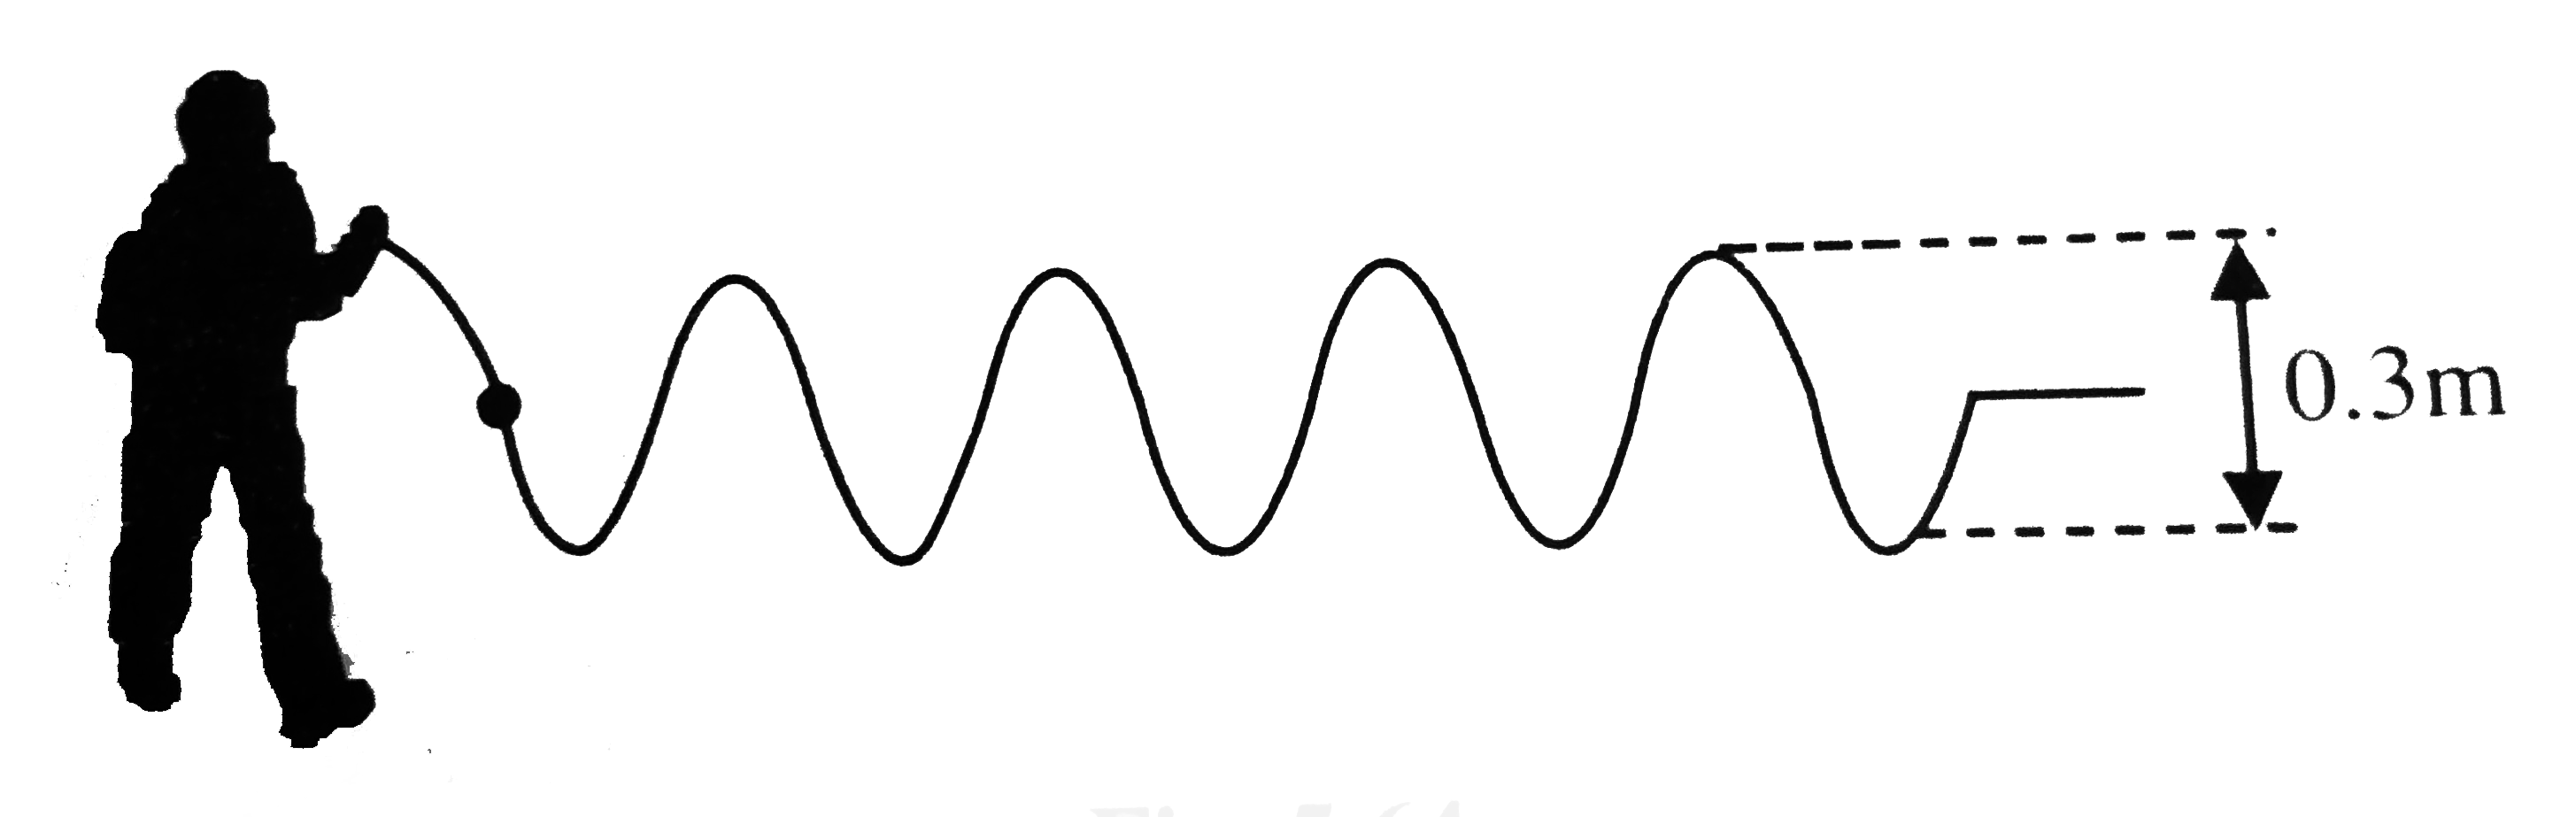 figure. Shows a student setting up wave wave on a long stretched string. The student's hand makes one complete up and down movement in 0.4 s and in each up and down movement the hand moves by a height of 0.3 m. The wavelength of the  waves on the string is 0.8 m.      The wave speed is